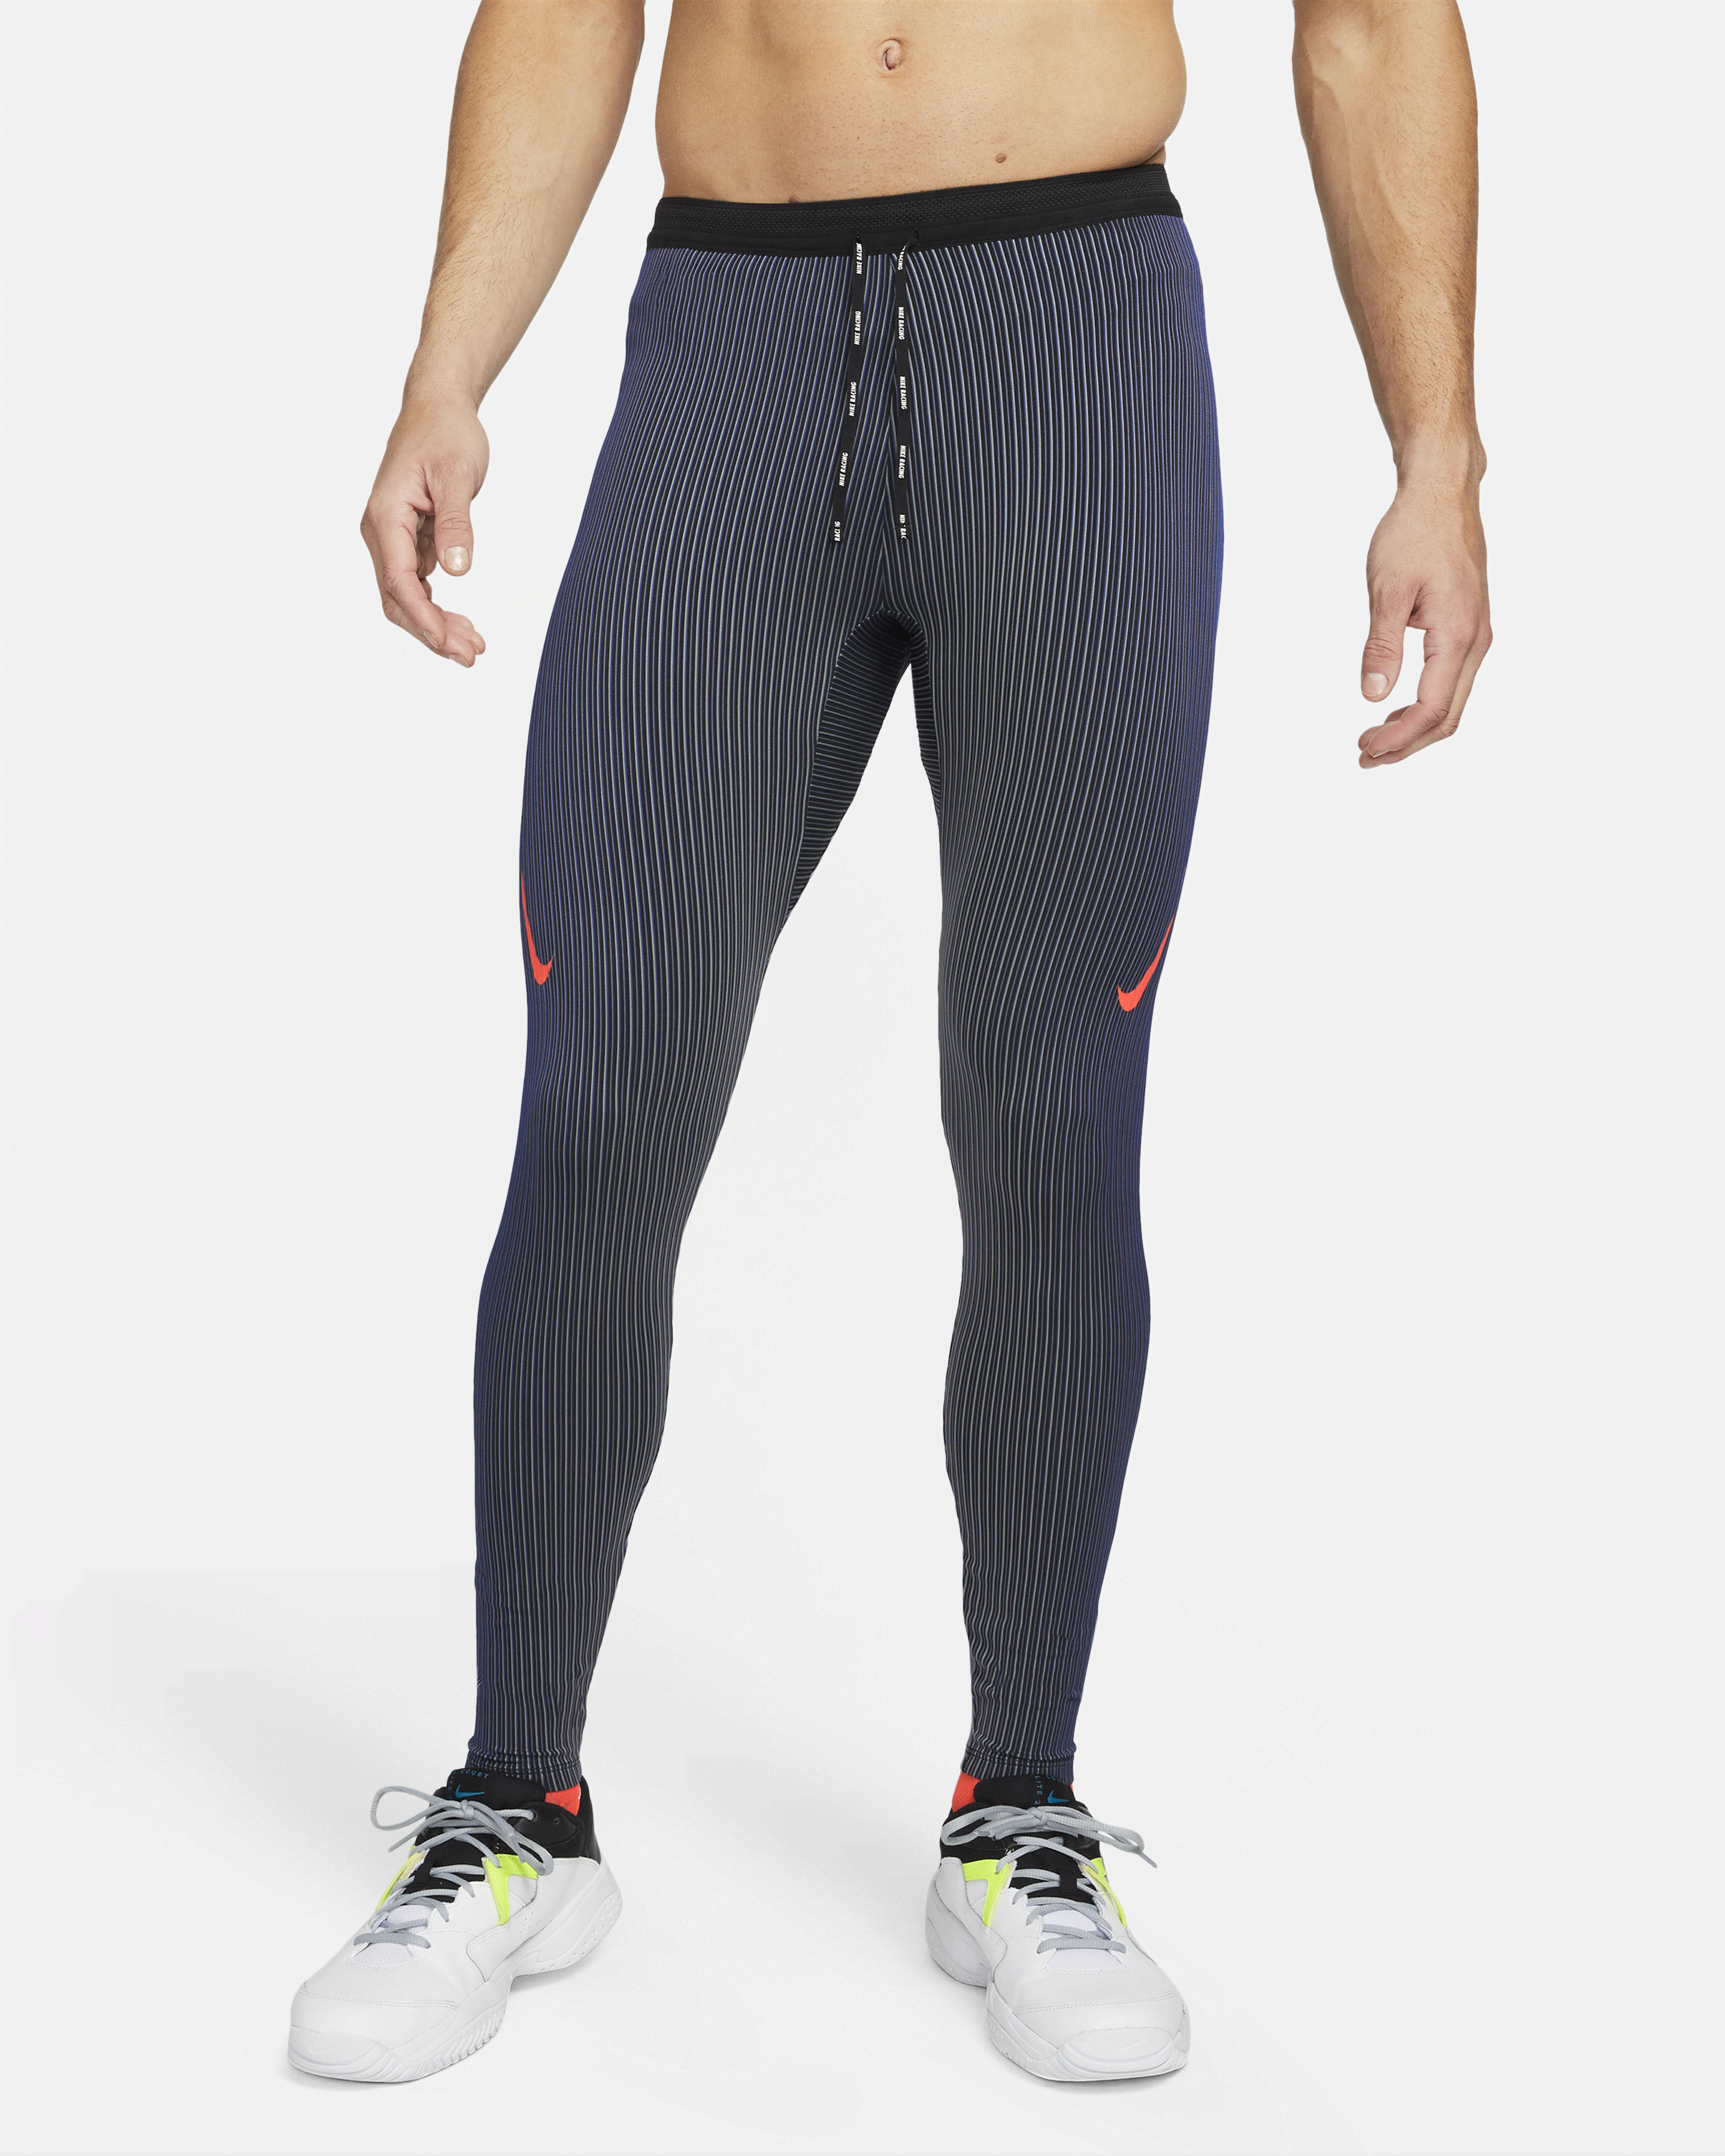 Best Trail Shoes - The 10 Best Men's Running Tights for Cold - Weather  Training